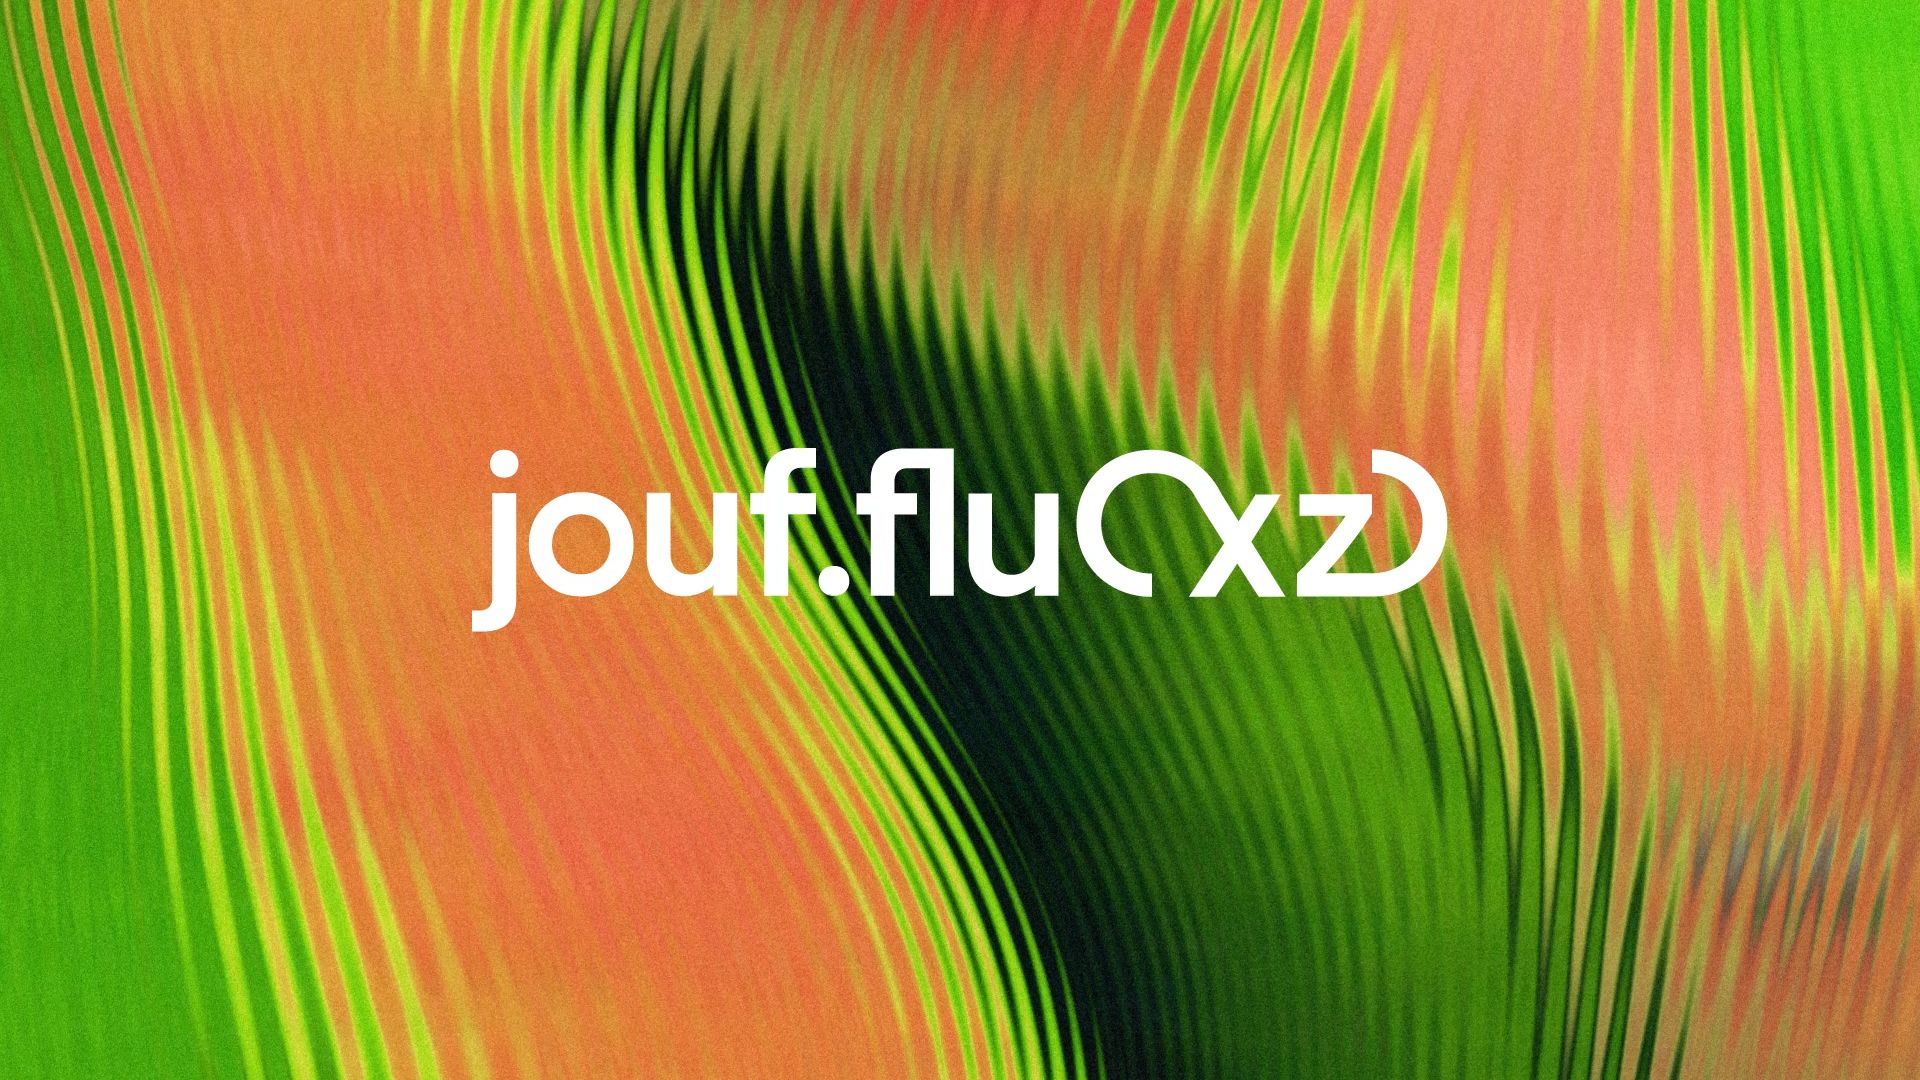 Jouf.flu(xz) — Let's multiply artistic times together - Branding